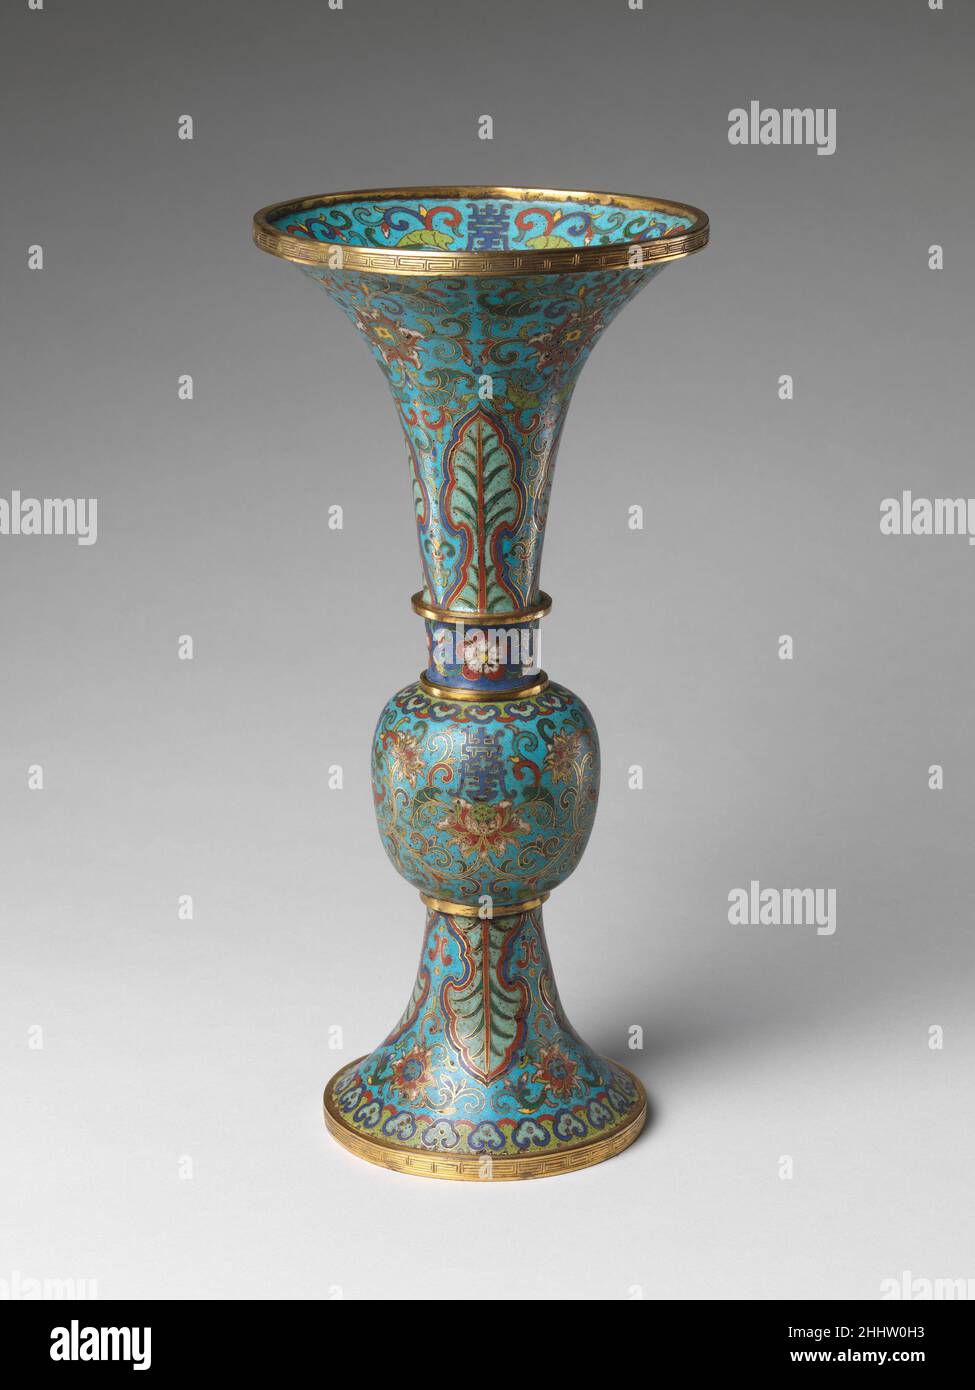 Vase from a Set of Five-Piece Altar Set (Wugong) 18th century China Cloisonné is the technique of creating designs on metal vessels with colored glass paste placed within enclosures made of copper or bronze wires, which have been bent or hammered into the desired patterns. Known as cloisons (French for 'partitions'), the enclosures are generally either glued or soldered onto the metal body. The glass paste, or enamel—which gets its color from metallic oxides—is painted into the contained areas of the design. The vessel is usually fired at a relatively low temperature, about 800 degrees Celsius Stock Photo